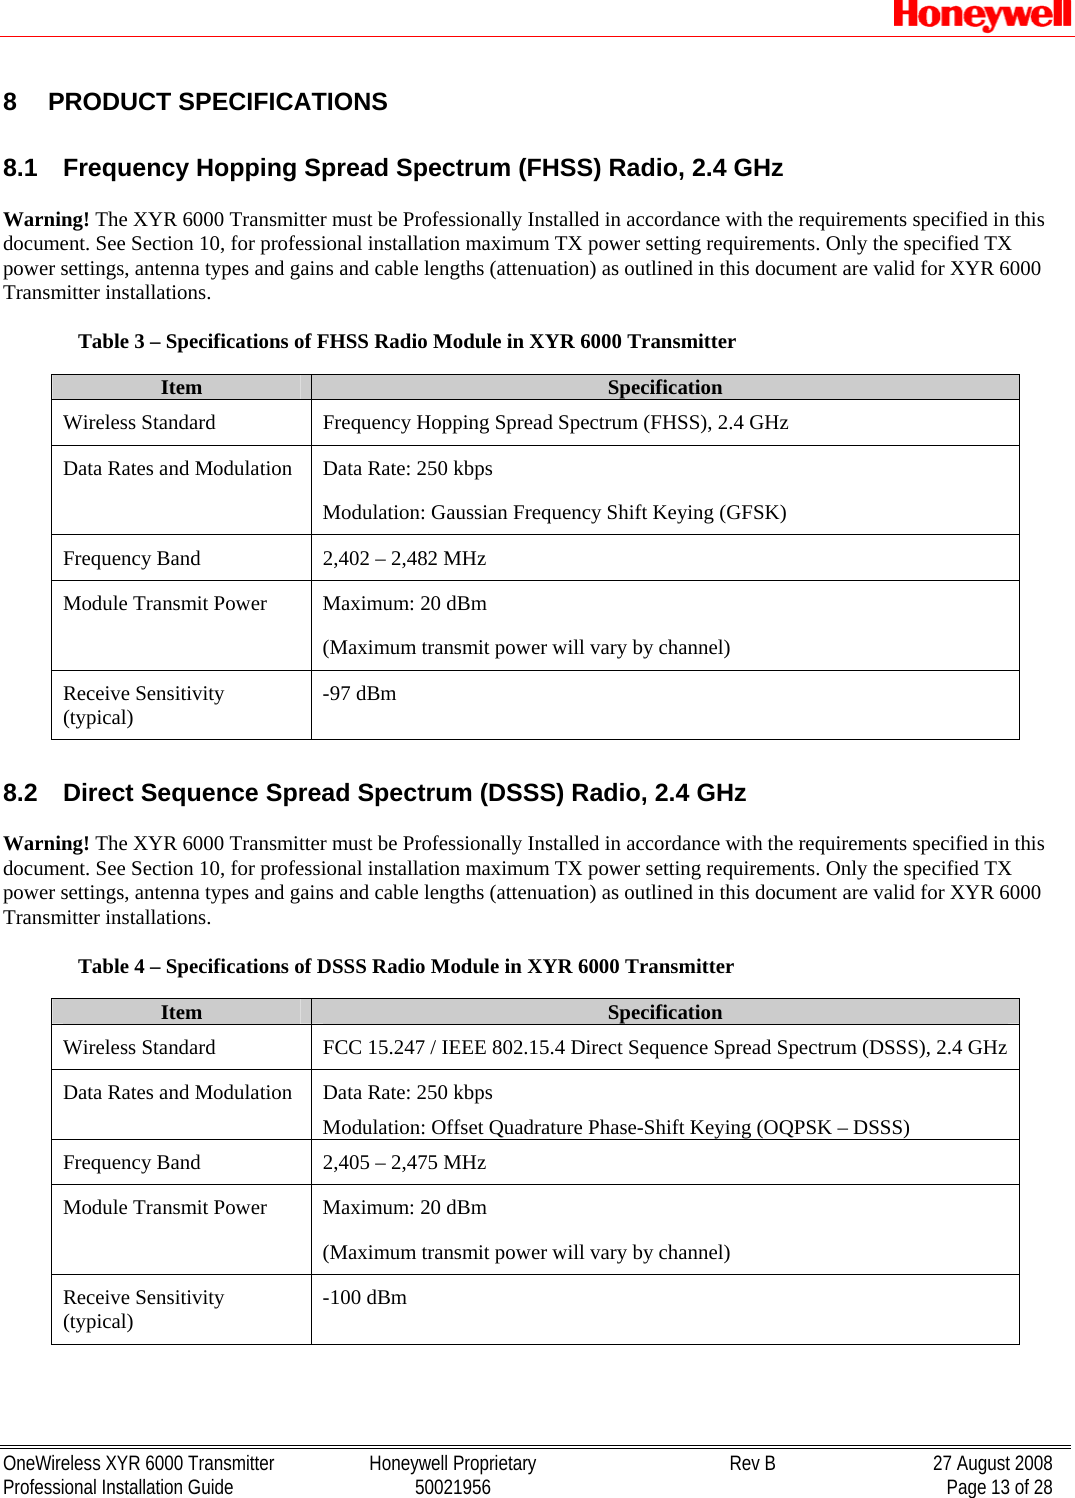   OneWireless XYR 6000 Transmitter  Honeywell Proprietary  Rev B  27 August 2008 8  PRODUCT SPECIFICATIONS  8.1  Frequency Hopping Spread Spectrum (FHSS) Radio, 2.4 GHz   Warning! The XYR 6000 Transmitter must be Professionally Installed in accordance with the requirements specified in this document. See Section 10, for professional installation maximum TX power setting requirements. Only the specified TX power settings, antenna types and gains and cable lengths (attenuation) as outlined in this document are valid for XYR 6000 Transmitter installations.  Table 3 – Specifications of FHSS Radio Module in XYR 6000 Transmitter Item  Specification Wireless Standard   Frequency Hopping Spread Spectrum (FHSS), 2.4 GHz Data Rates and Modulation  Data Rate: 250 kbps  Modulation: Gaussian Frequency Shift Keying (GFSK) Frequency Band  2,402 – 2,482 MHz  Module Transmit Power  Maximum: 20 dBm (Maximum transmit power will vary by channel)  Receive Sensitivity (typical)  -97 dBm Professional Installation Guide  50021956    Page 13 of 28  8.2  Direct Sequence Spread Spectrum (DSSS) Radio, 2.4 GHz   Warning! The XYR 6000 Transmitter must be Professionally Installed in accordance with the requirements specified in this document. See Section 10, for professional installation maximum TX power setting requirements. Only the specified TX power settings, antenna types and gains and cable lengths (attenuation) as outlined in this document are valid for XYR 6000 Transmitter installations.  Table 4 – Specifications of DSSS Radio Module in XYR 6000 Transmitter Item  Specification Wireless Standard   FCC 15.247 / IEEE 802.15.4 Direct Sequence Spread Spectrum (DSSS), 2.4 GHz Data Rates and Modulation  Data Rate: 250 kbps  Modulation: Offset Quadrature Phase-Shift Keying (OQPSK – DSSS) Frequency Band  2,405 – 2,475 MHz  Module Transmit Power  Maximum: 20 dBm (Maximum transmit power will vary by channel)  Receive Sensitivity (typical)  -100 dBm   